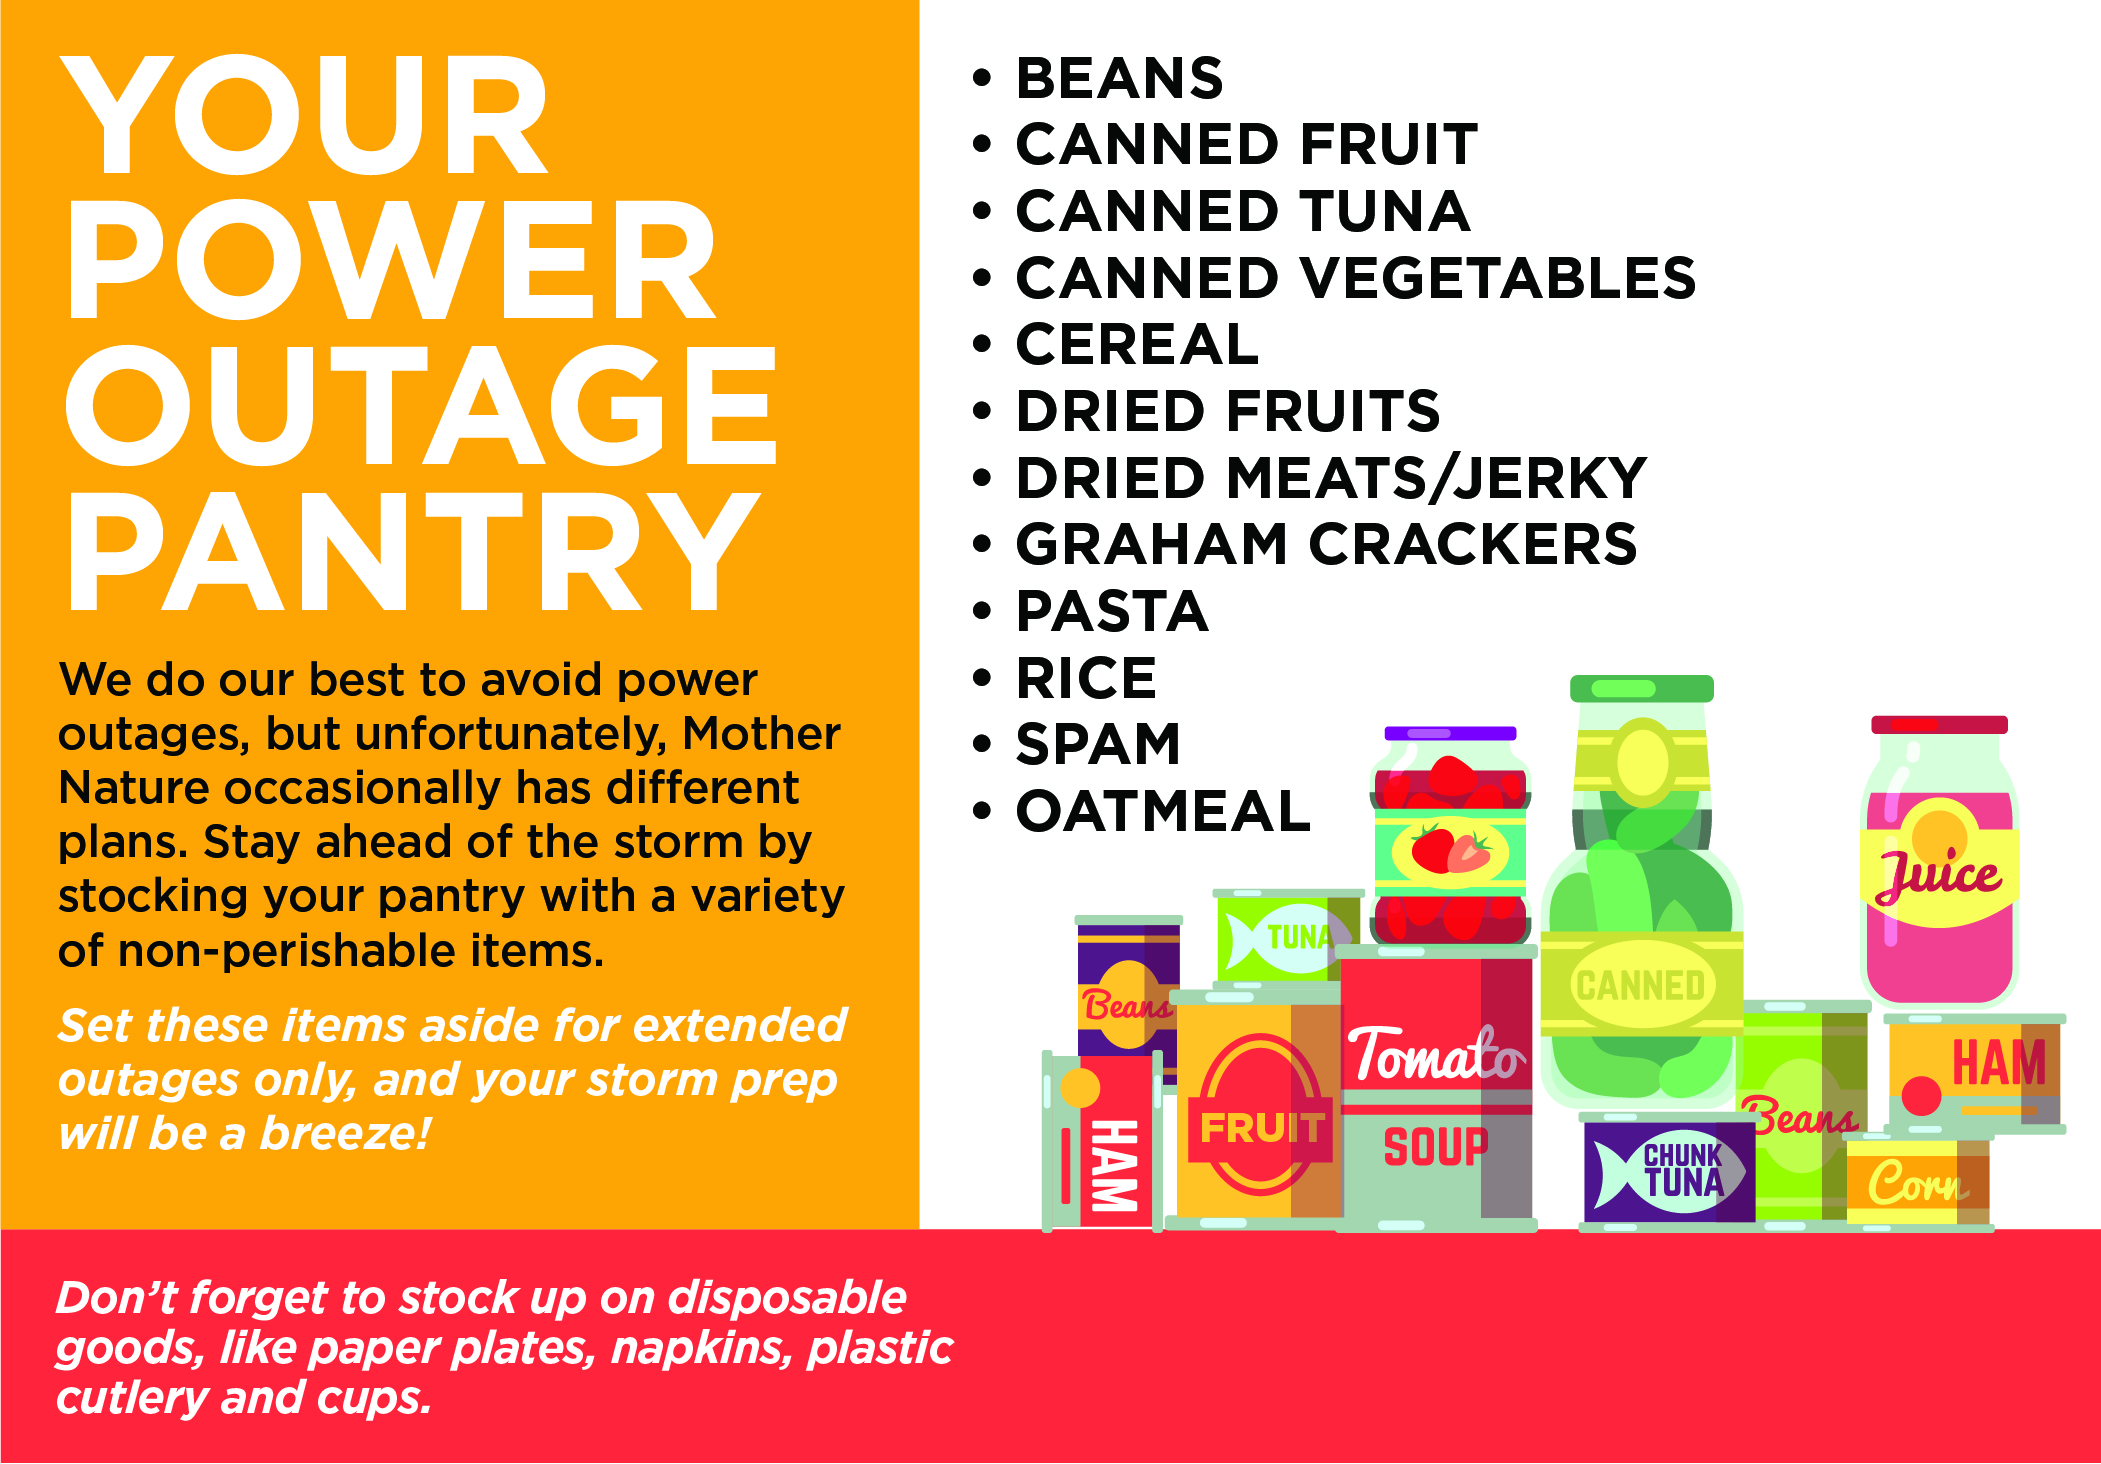 Your power outage pantry